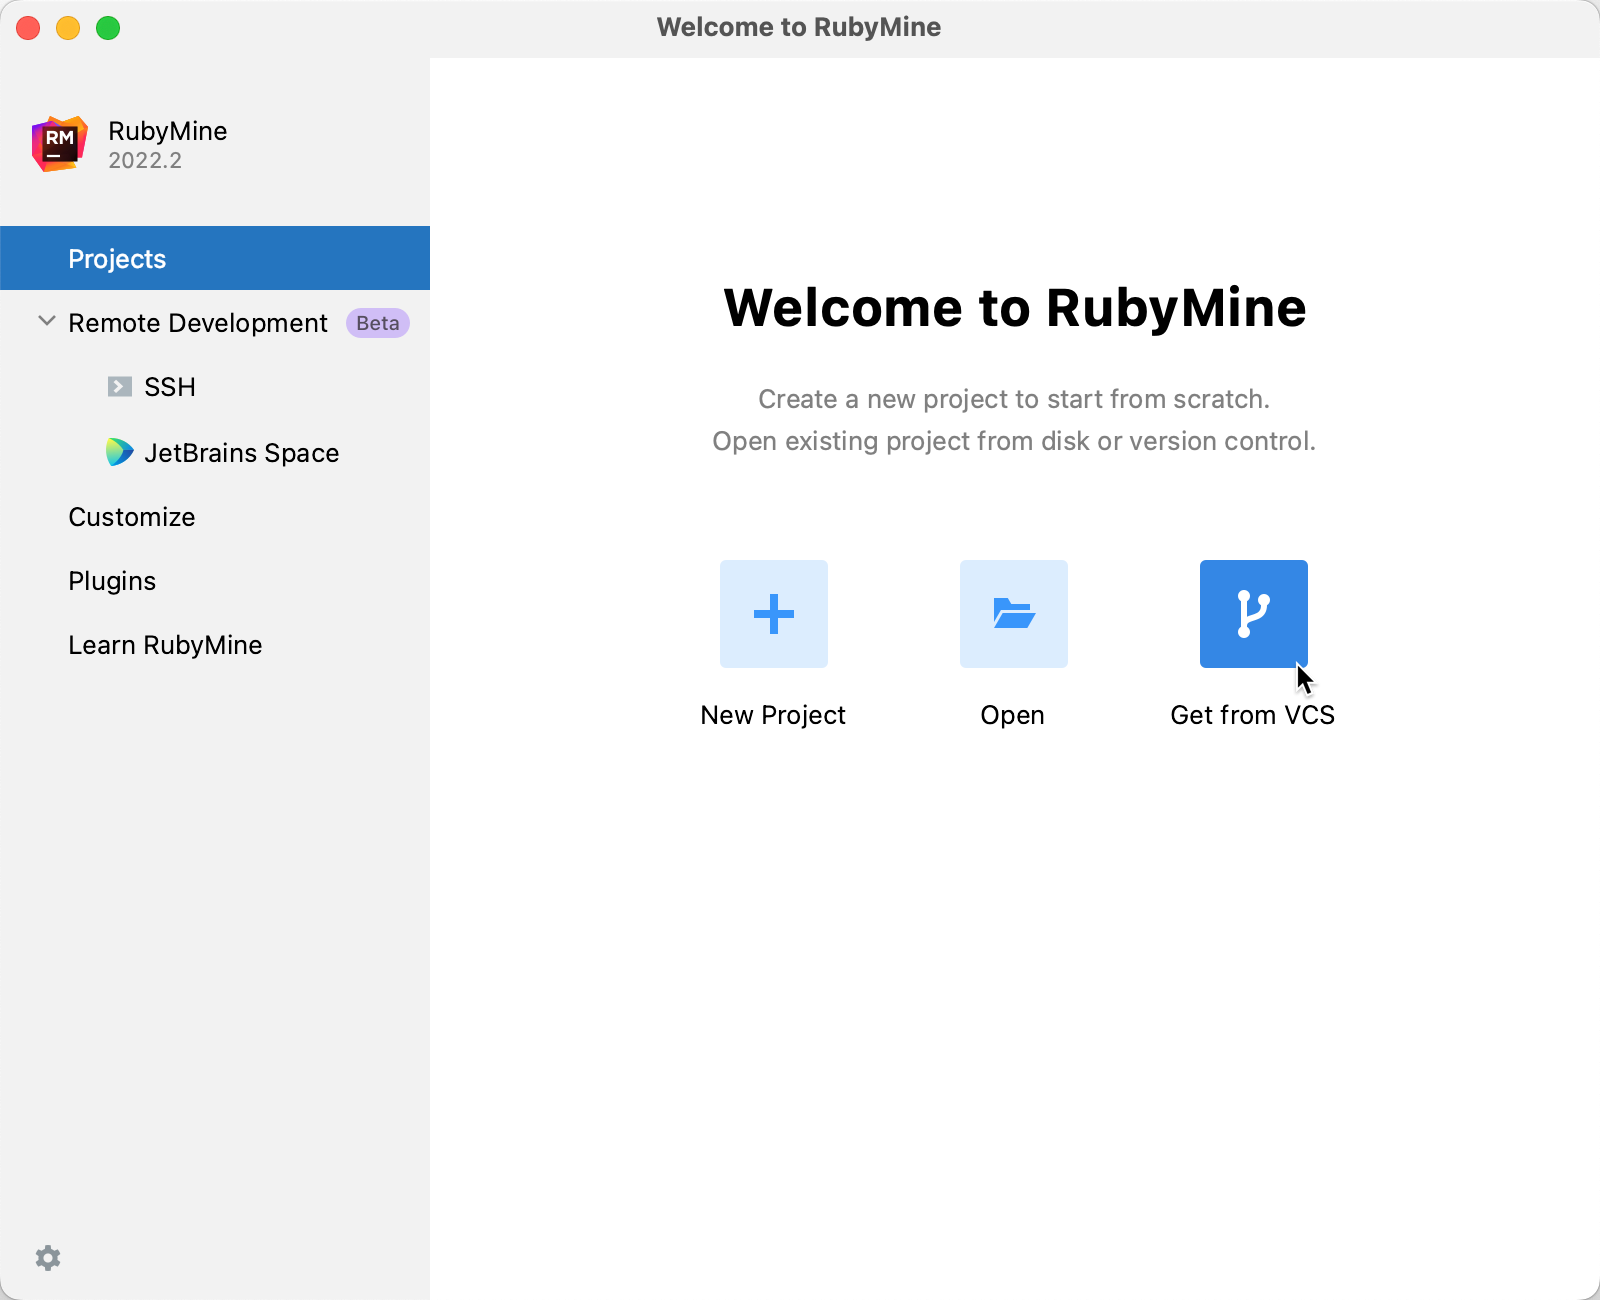 Welcome Screen / Get from Version Control